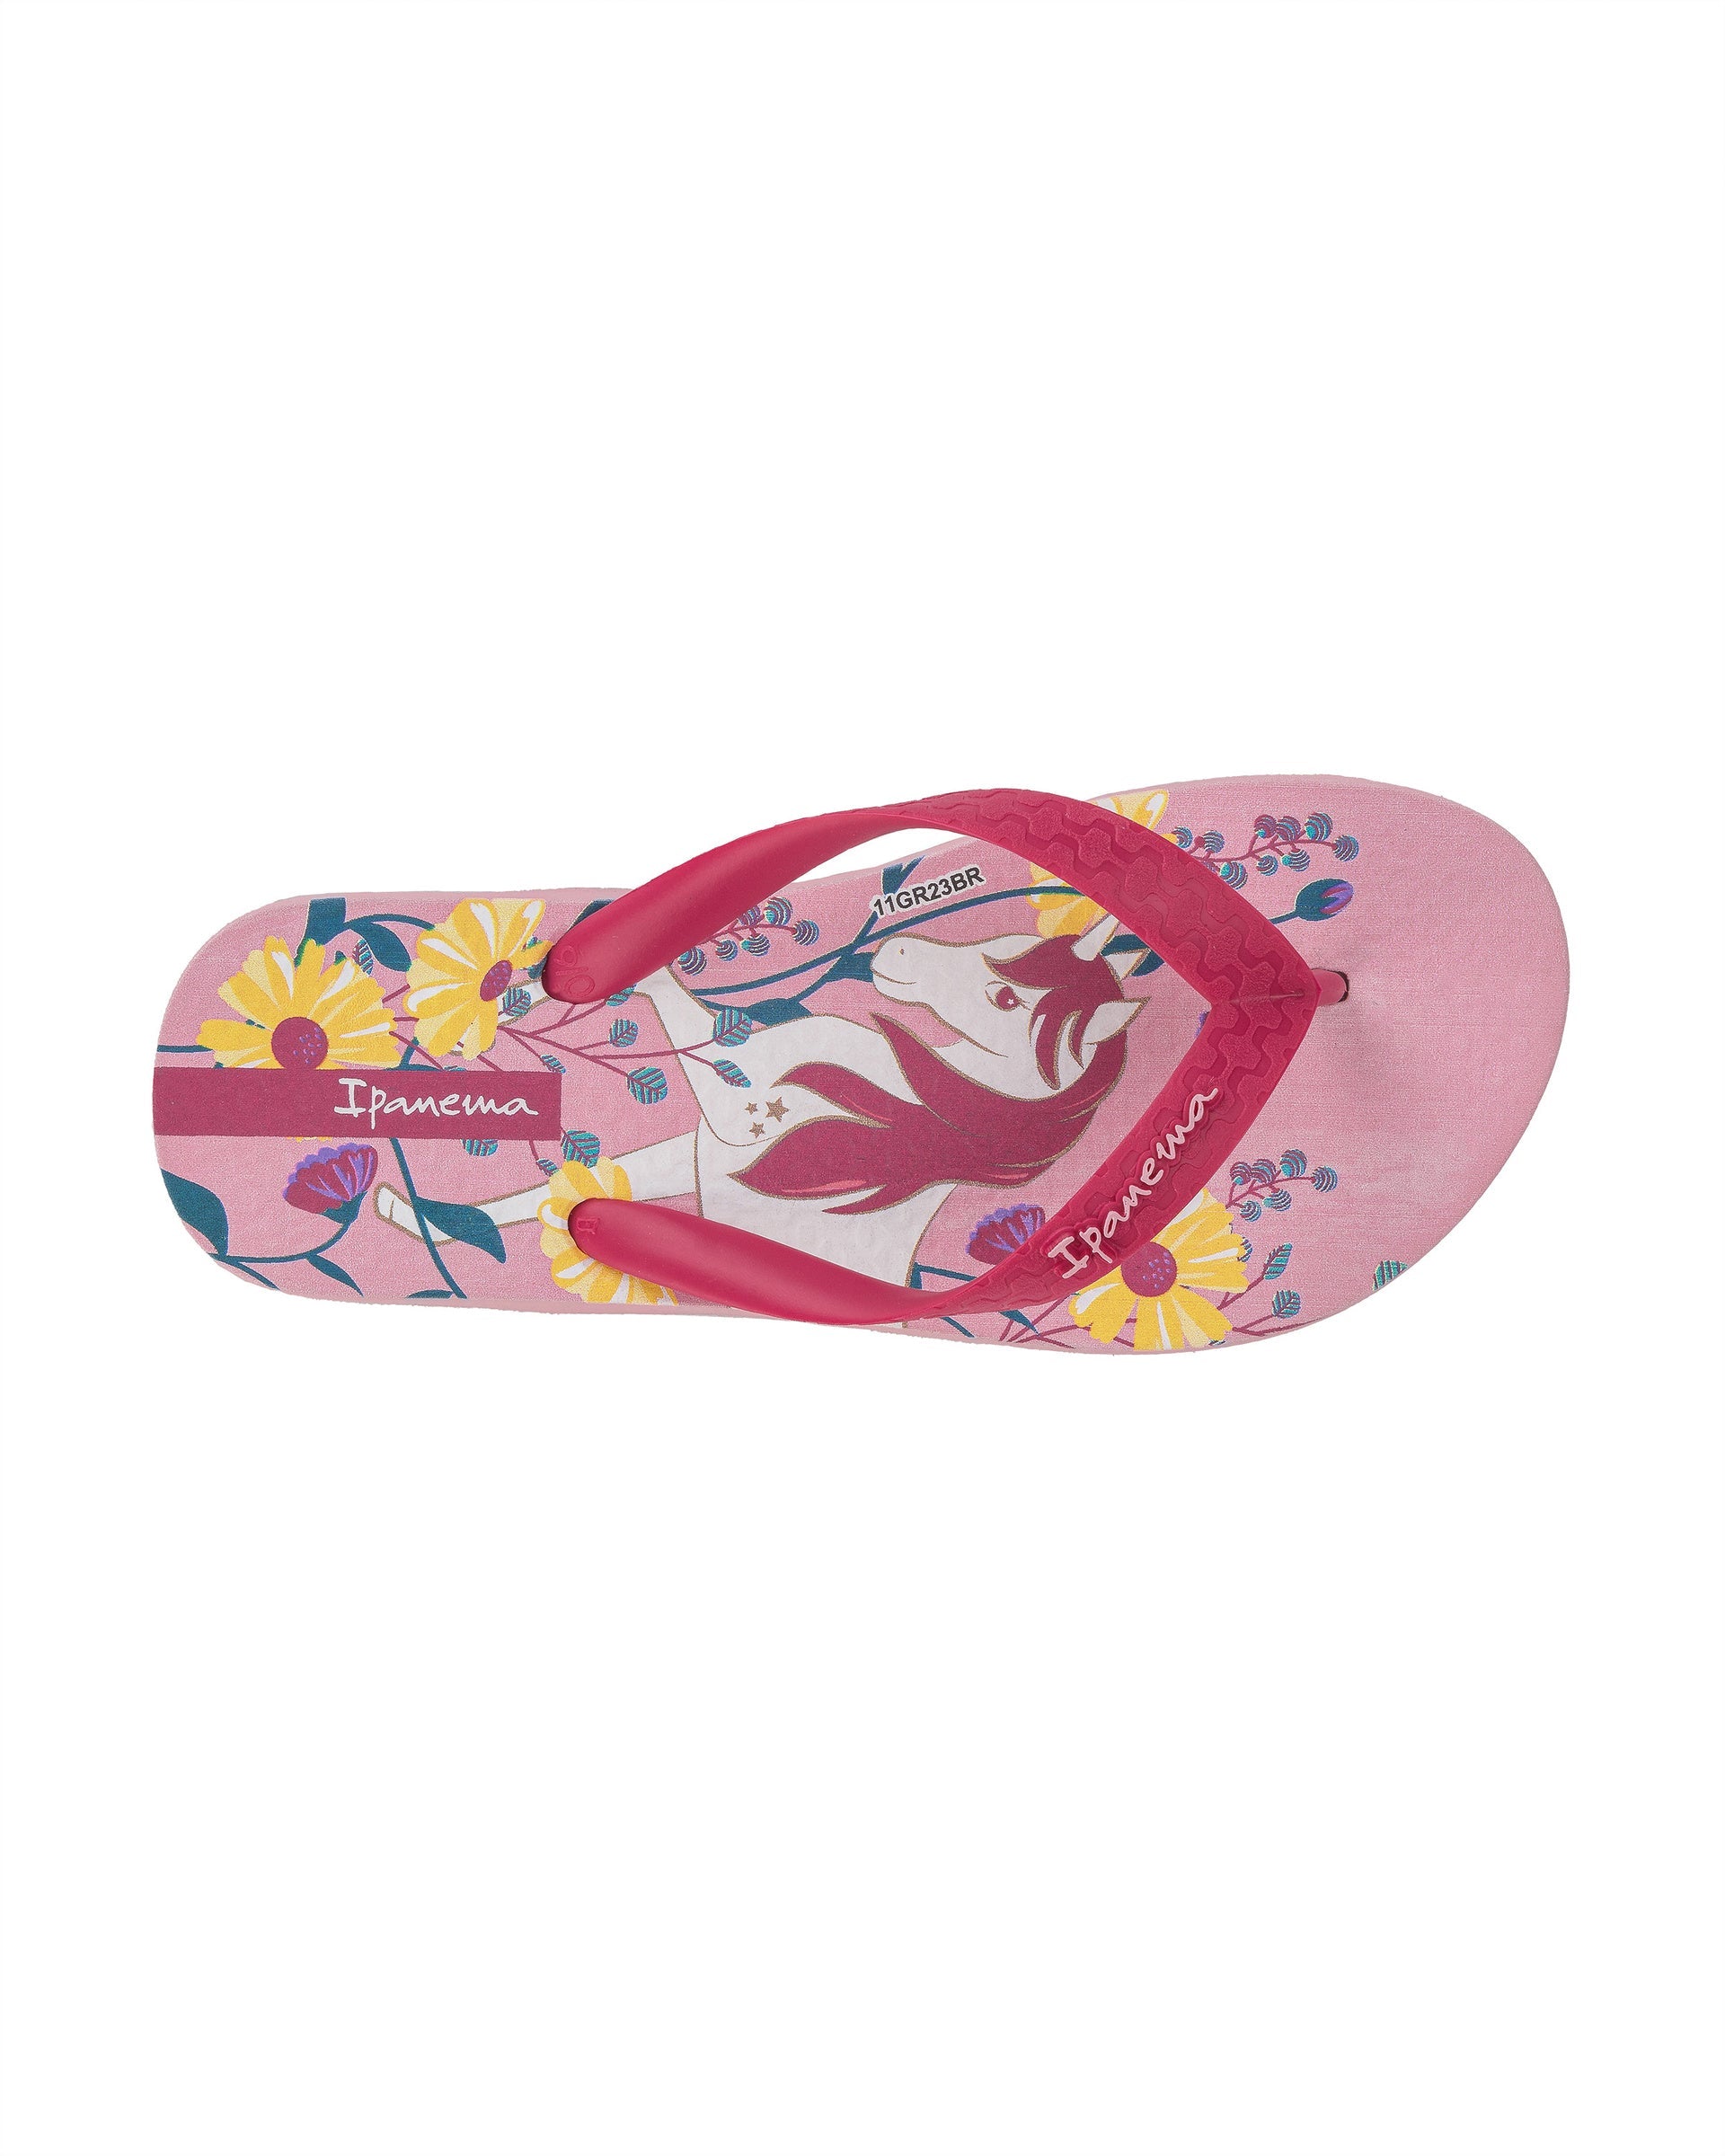 Top view of a pink Ipanema Temas kids flip flop with unicorn and flower print.